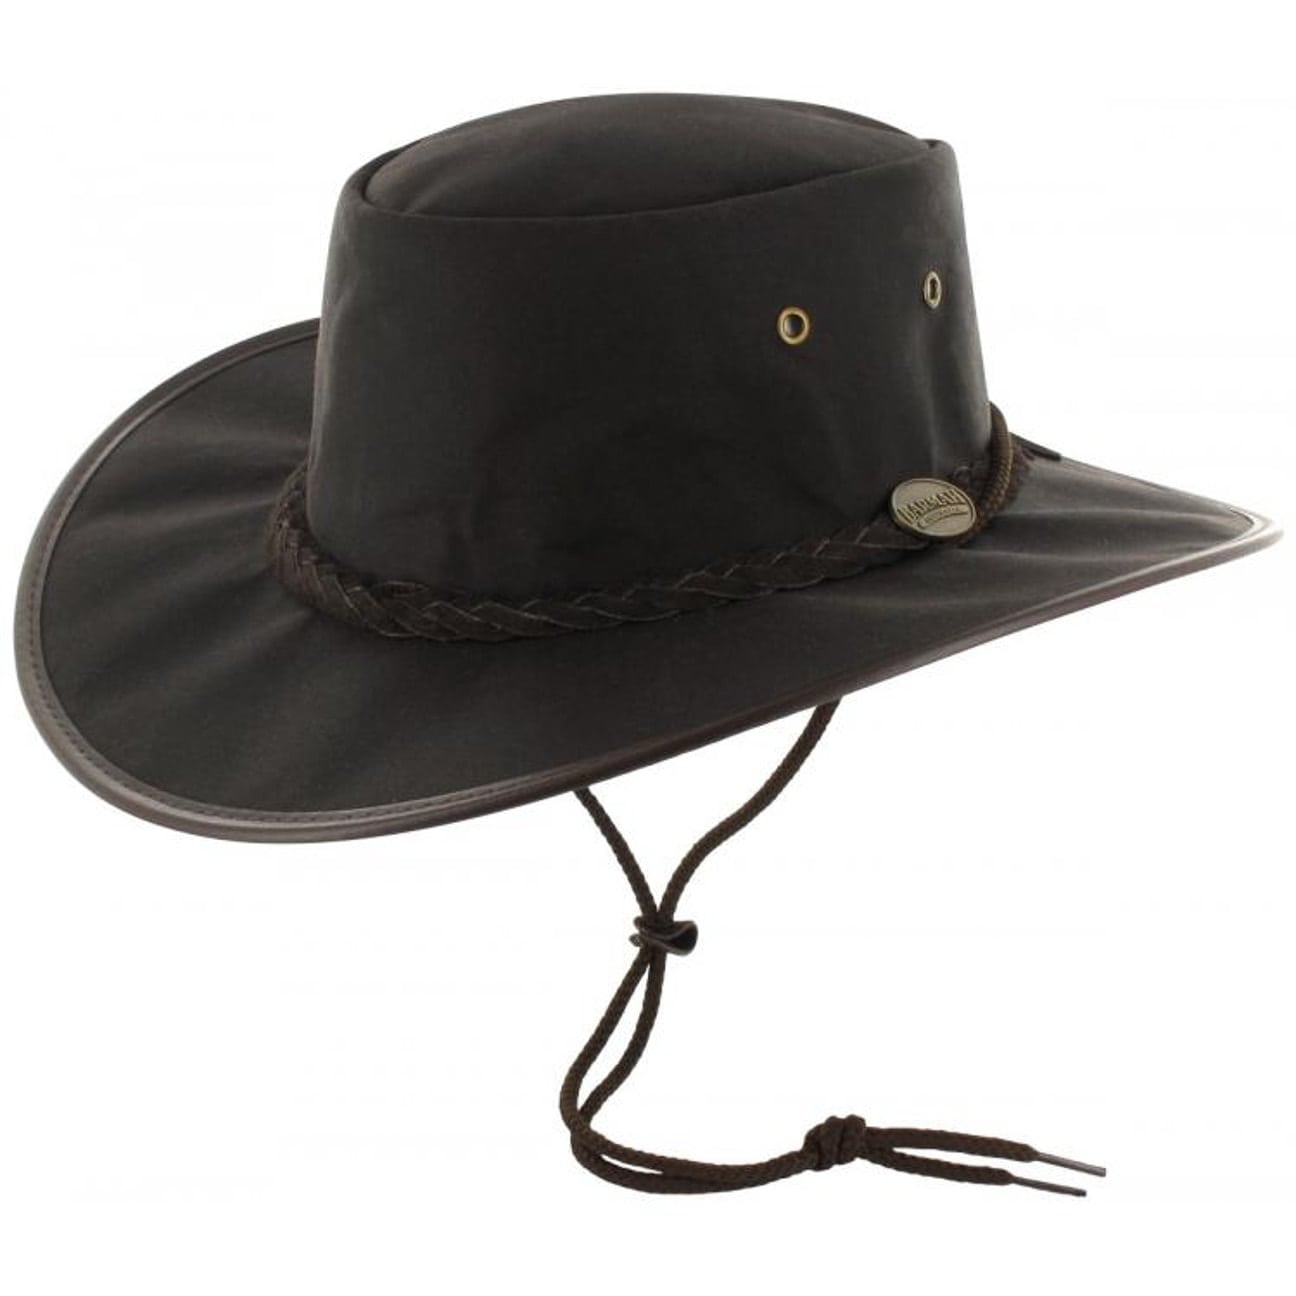 Drover Deluxe Oilskin Hat by BARMAH - 83,95